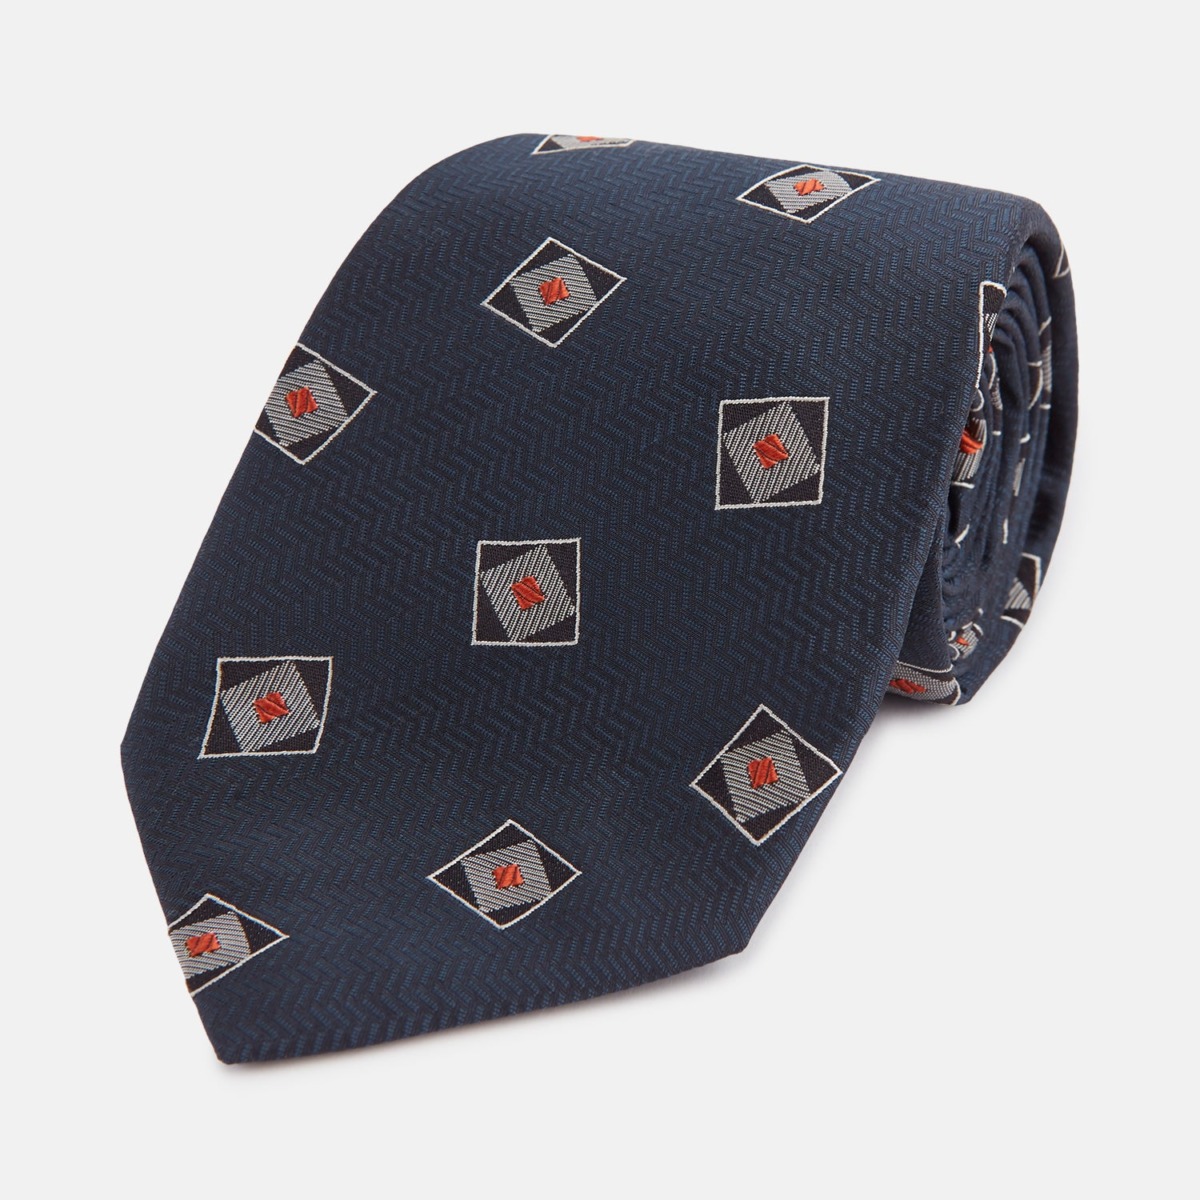 Turnbull & Asser - Grey Tie at Turnbull And Asser GOOFASH